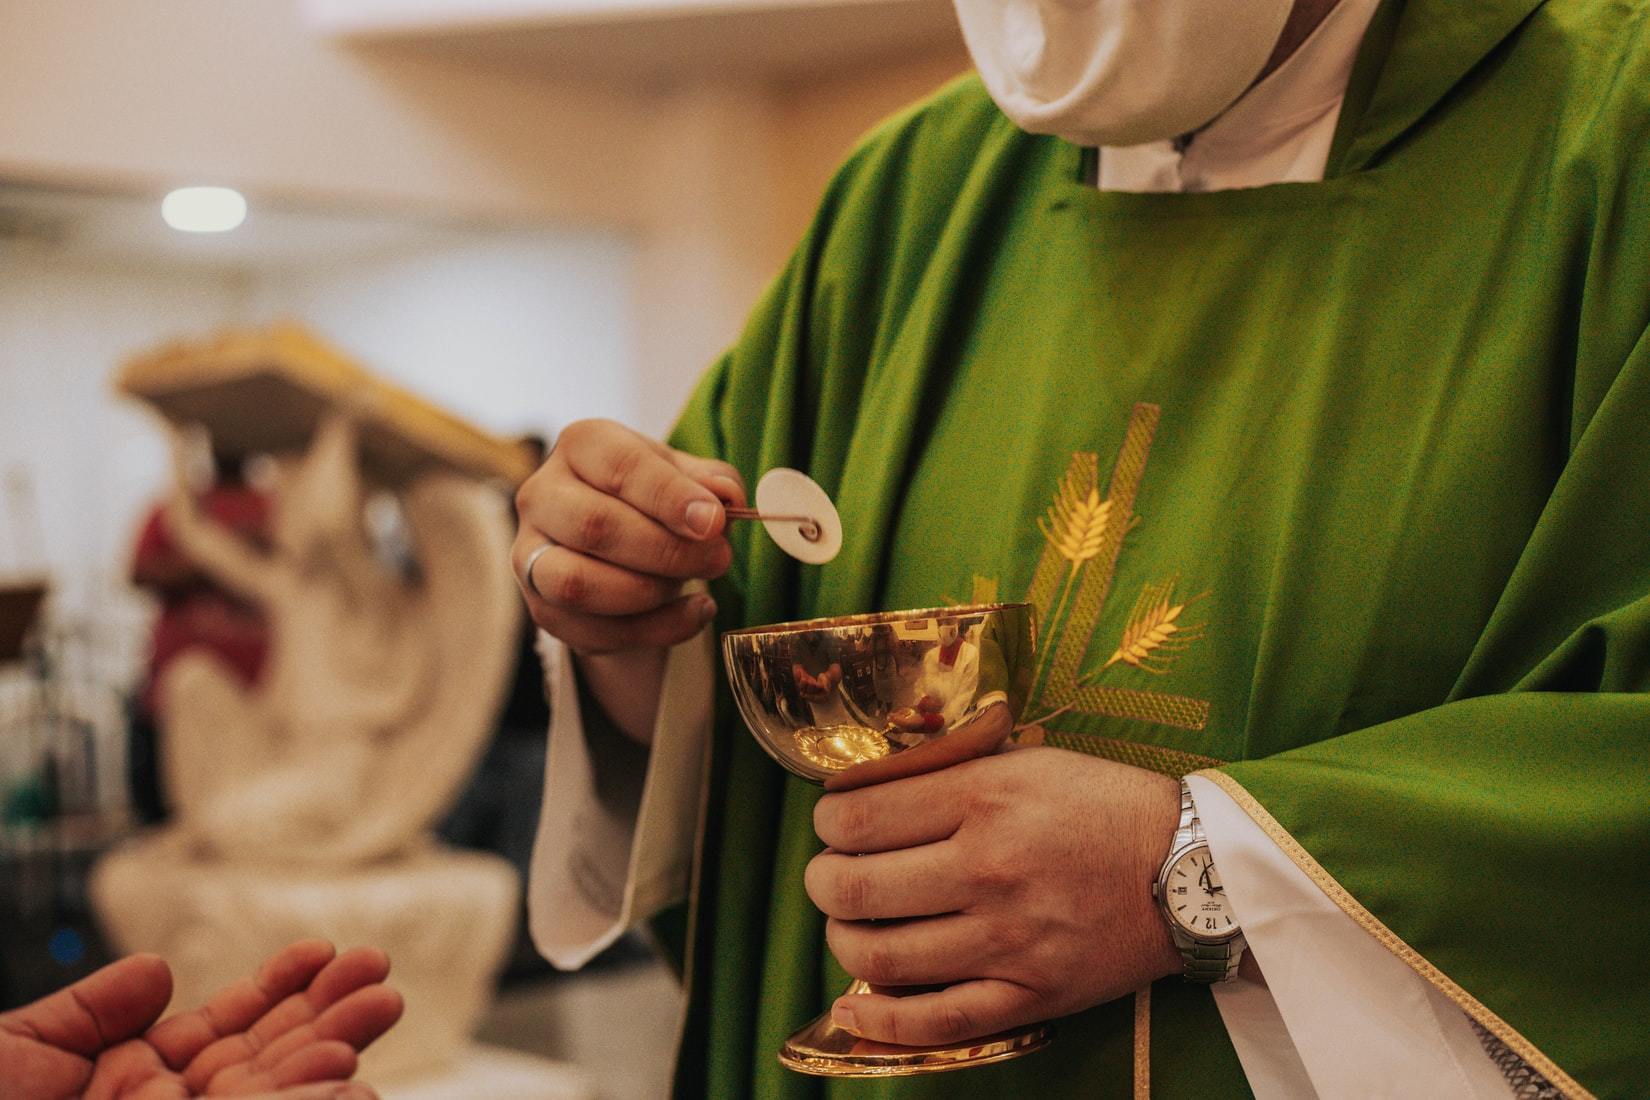 Catholic diocese instructs priests to withold baptism, communion from trans-identified individuals